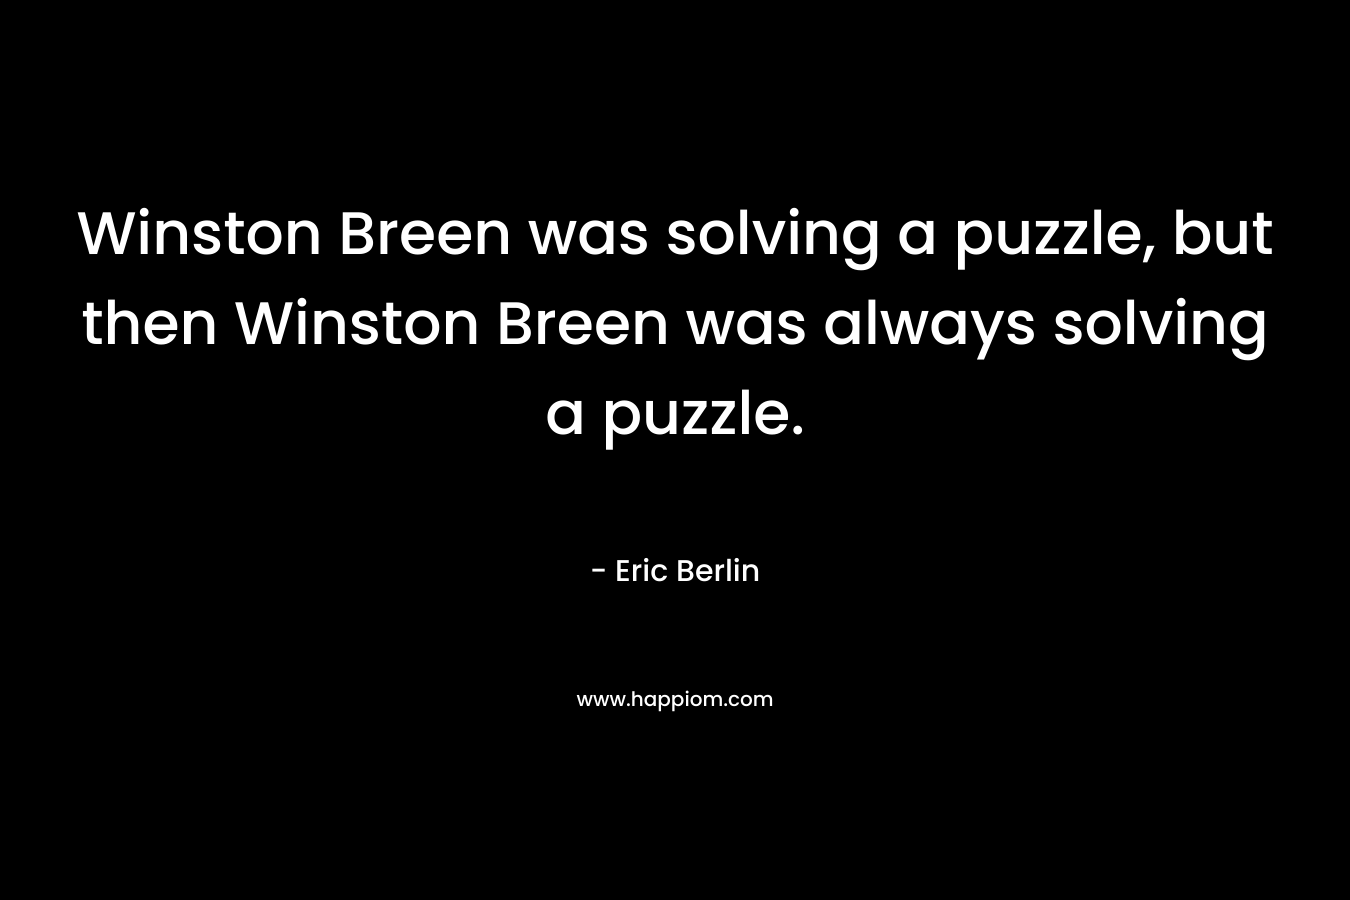 Winston Breen was solving a puzzle, but then Winston Breen was always solving a puzzle. – Eric Berlin